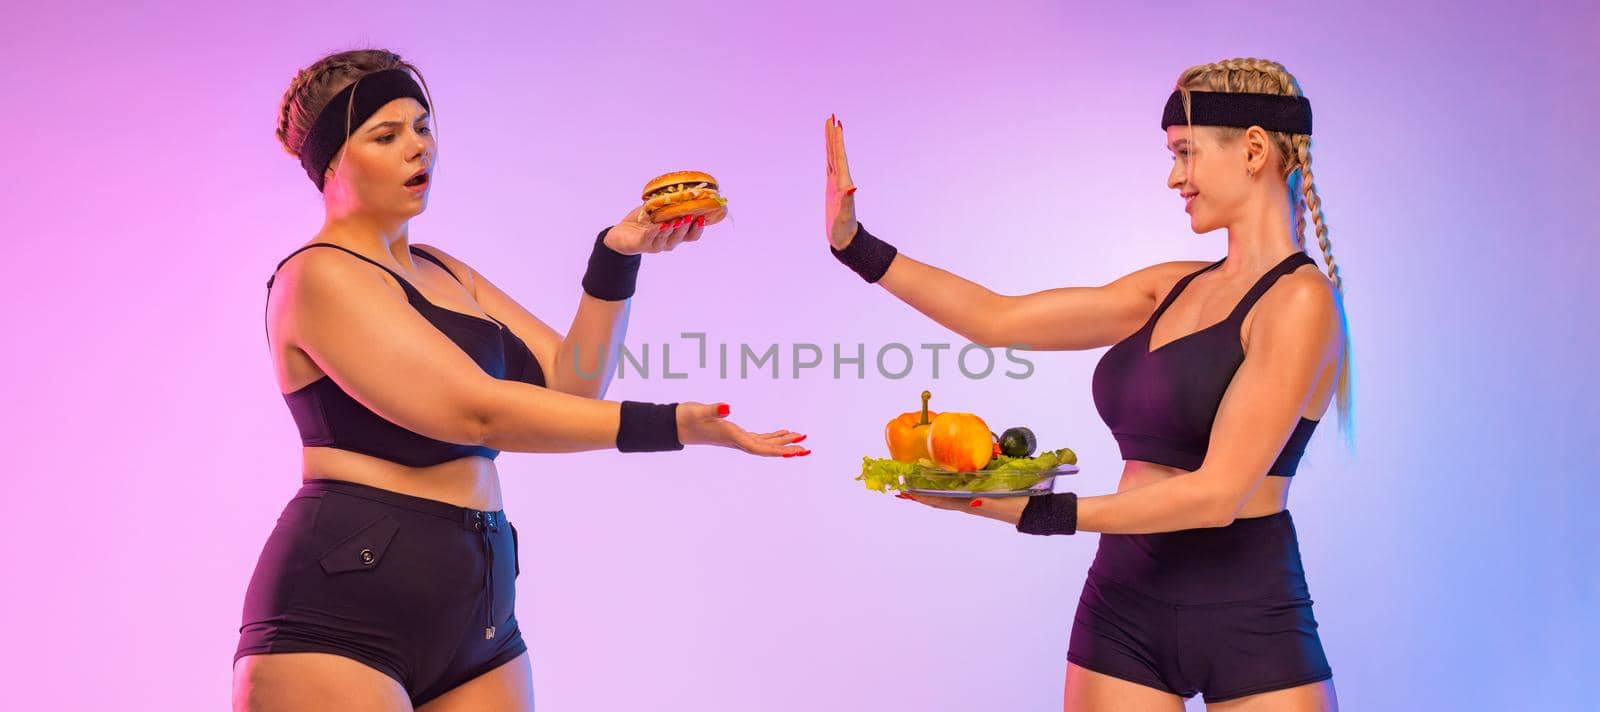 Fat Girl Size Plus Model Change Fast Food Burger On Proper Nutrition Of Vegetables. Vegans Health Food. Meat versus vegetables. Idea for a social media post on the topic of dietetics. by MikeOrlov